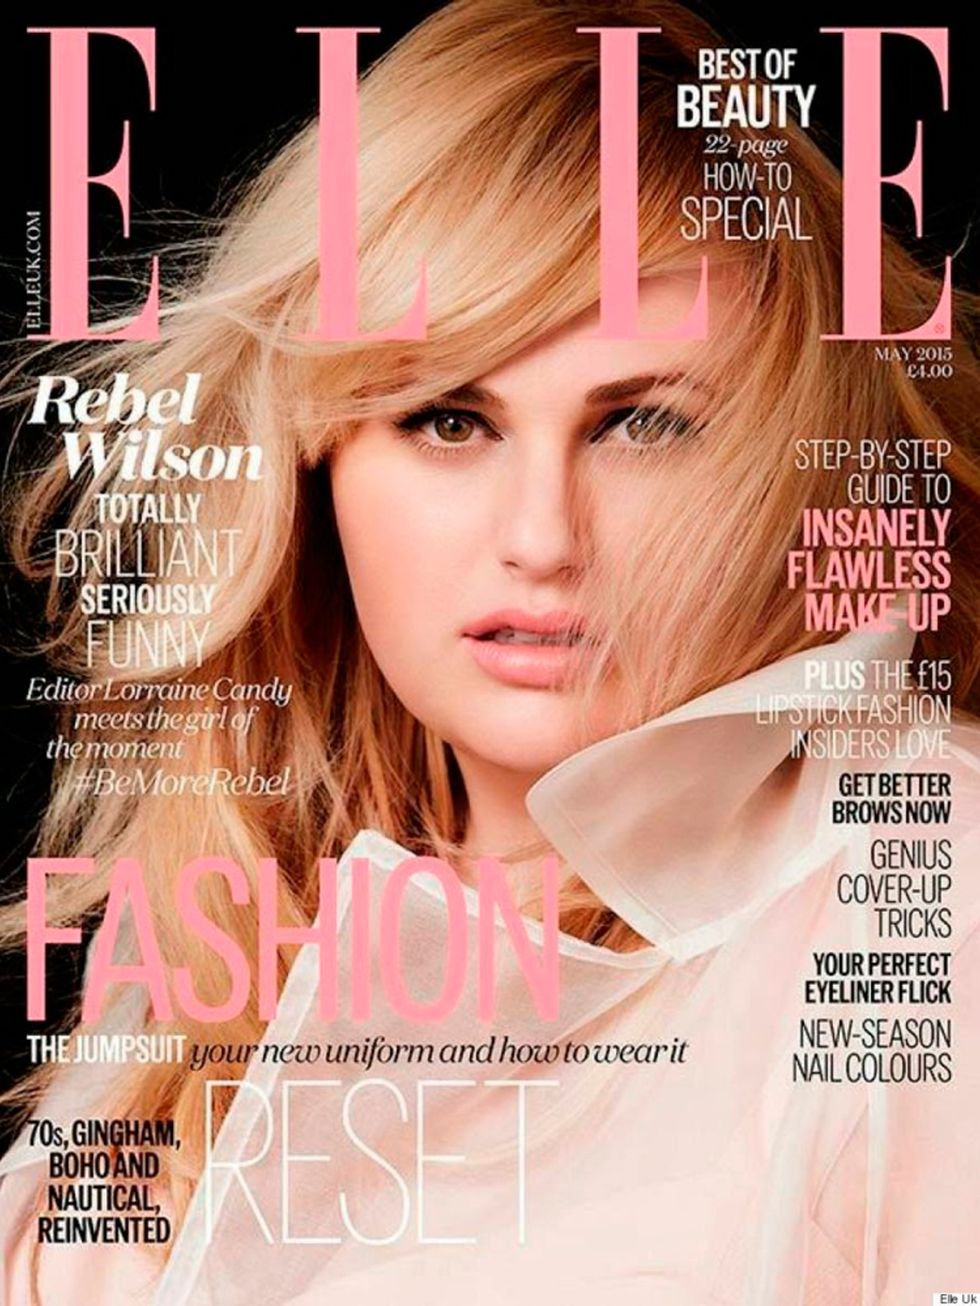 <p>The skincare and make-up essentials you need to recreate Rebel Williams&#39; May cover look.</p>

<p><a href="https://itunes.apple.com/gb/app/elle-magazine-uk/id469353635?mt=8">Download the May issue now!</a></p>